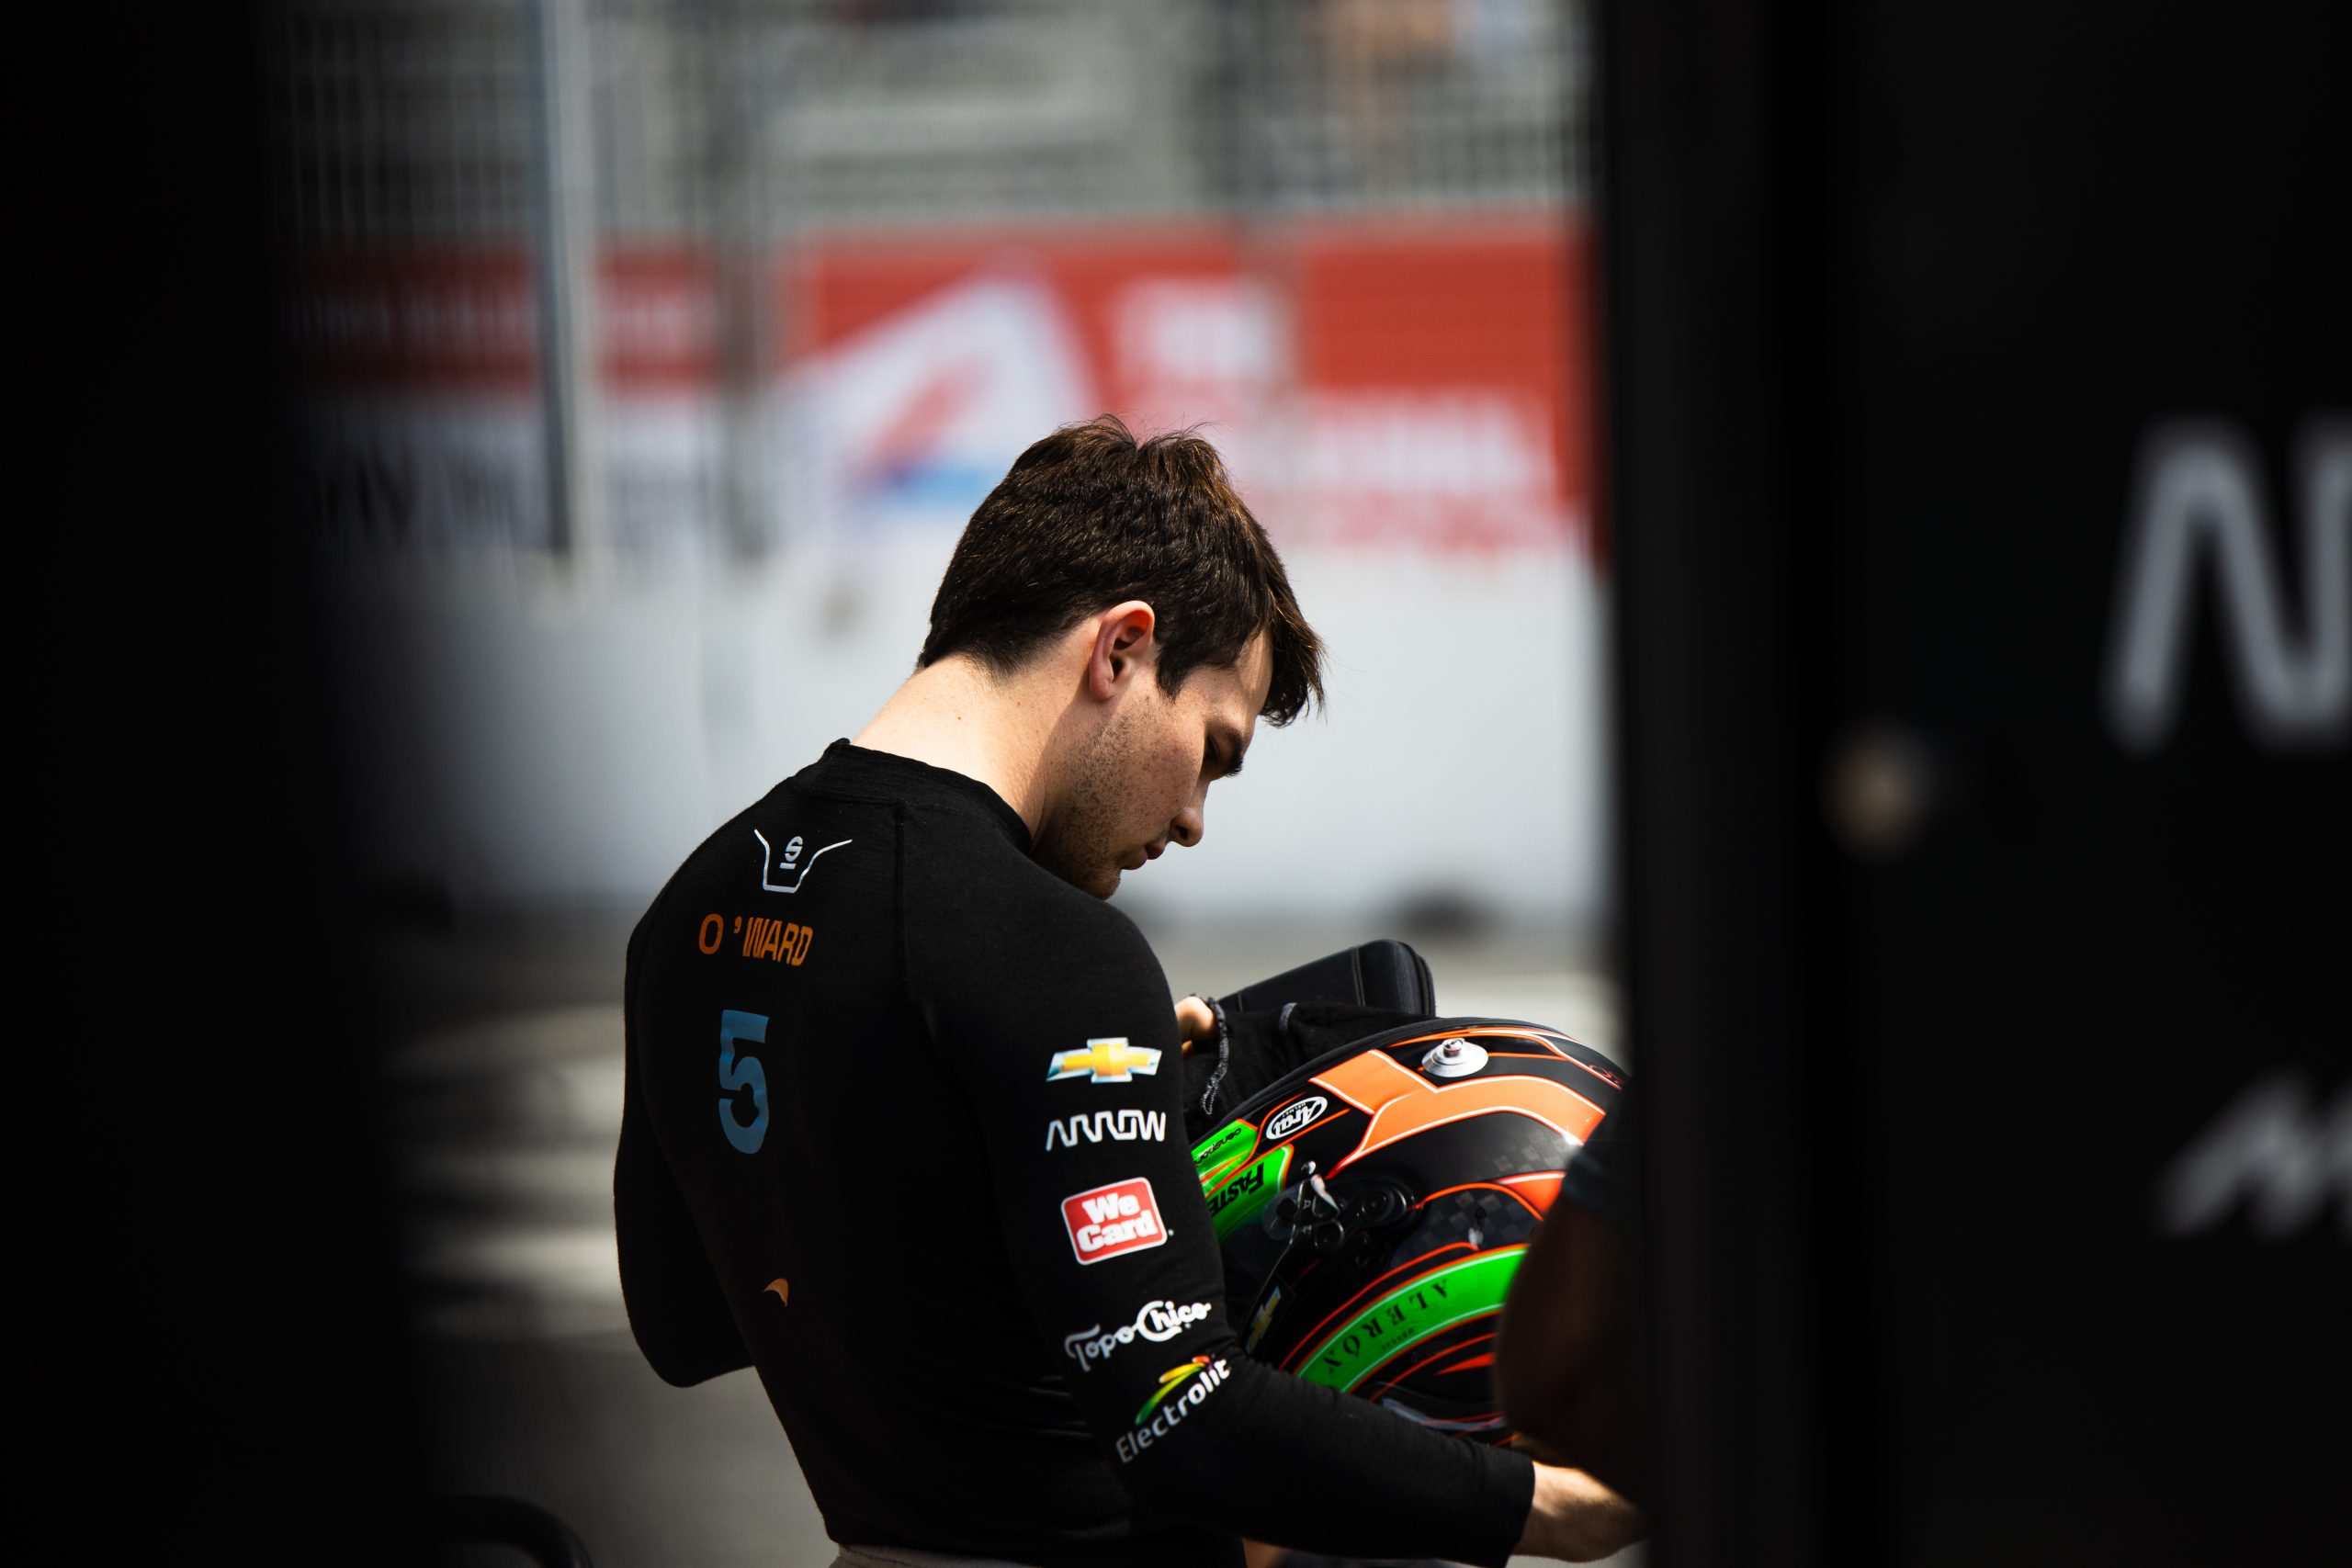 Pato O'Ward is focused on building a successful INDYCAR career. (Photo: Jack Shanlin | The Podium Finish)